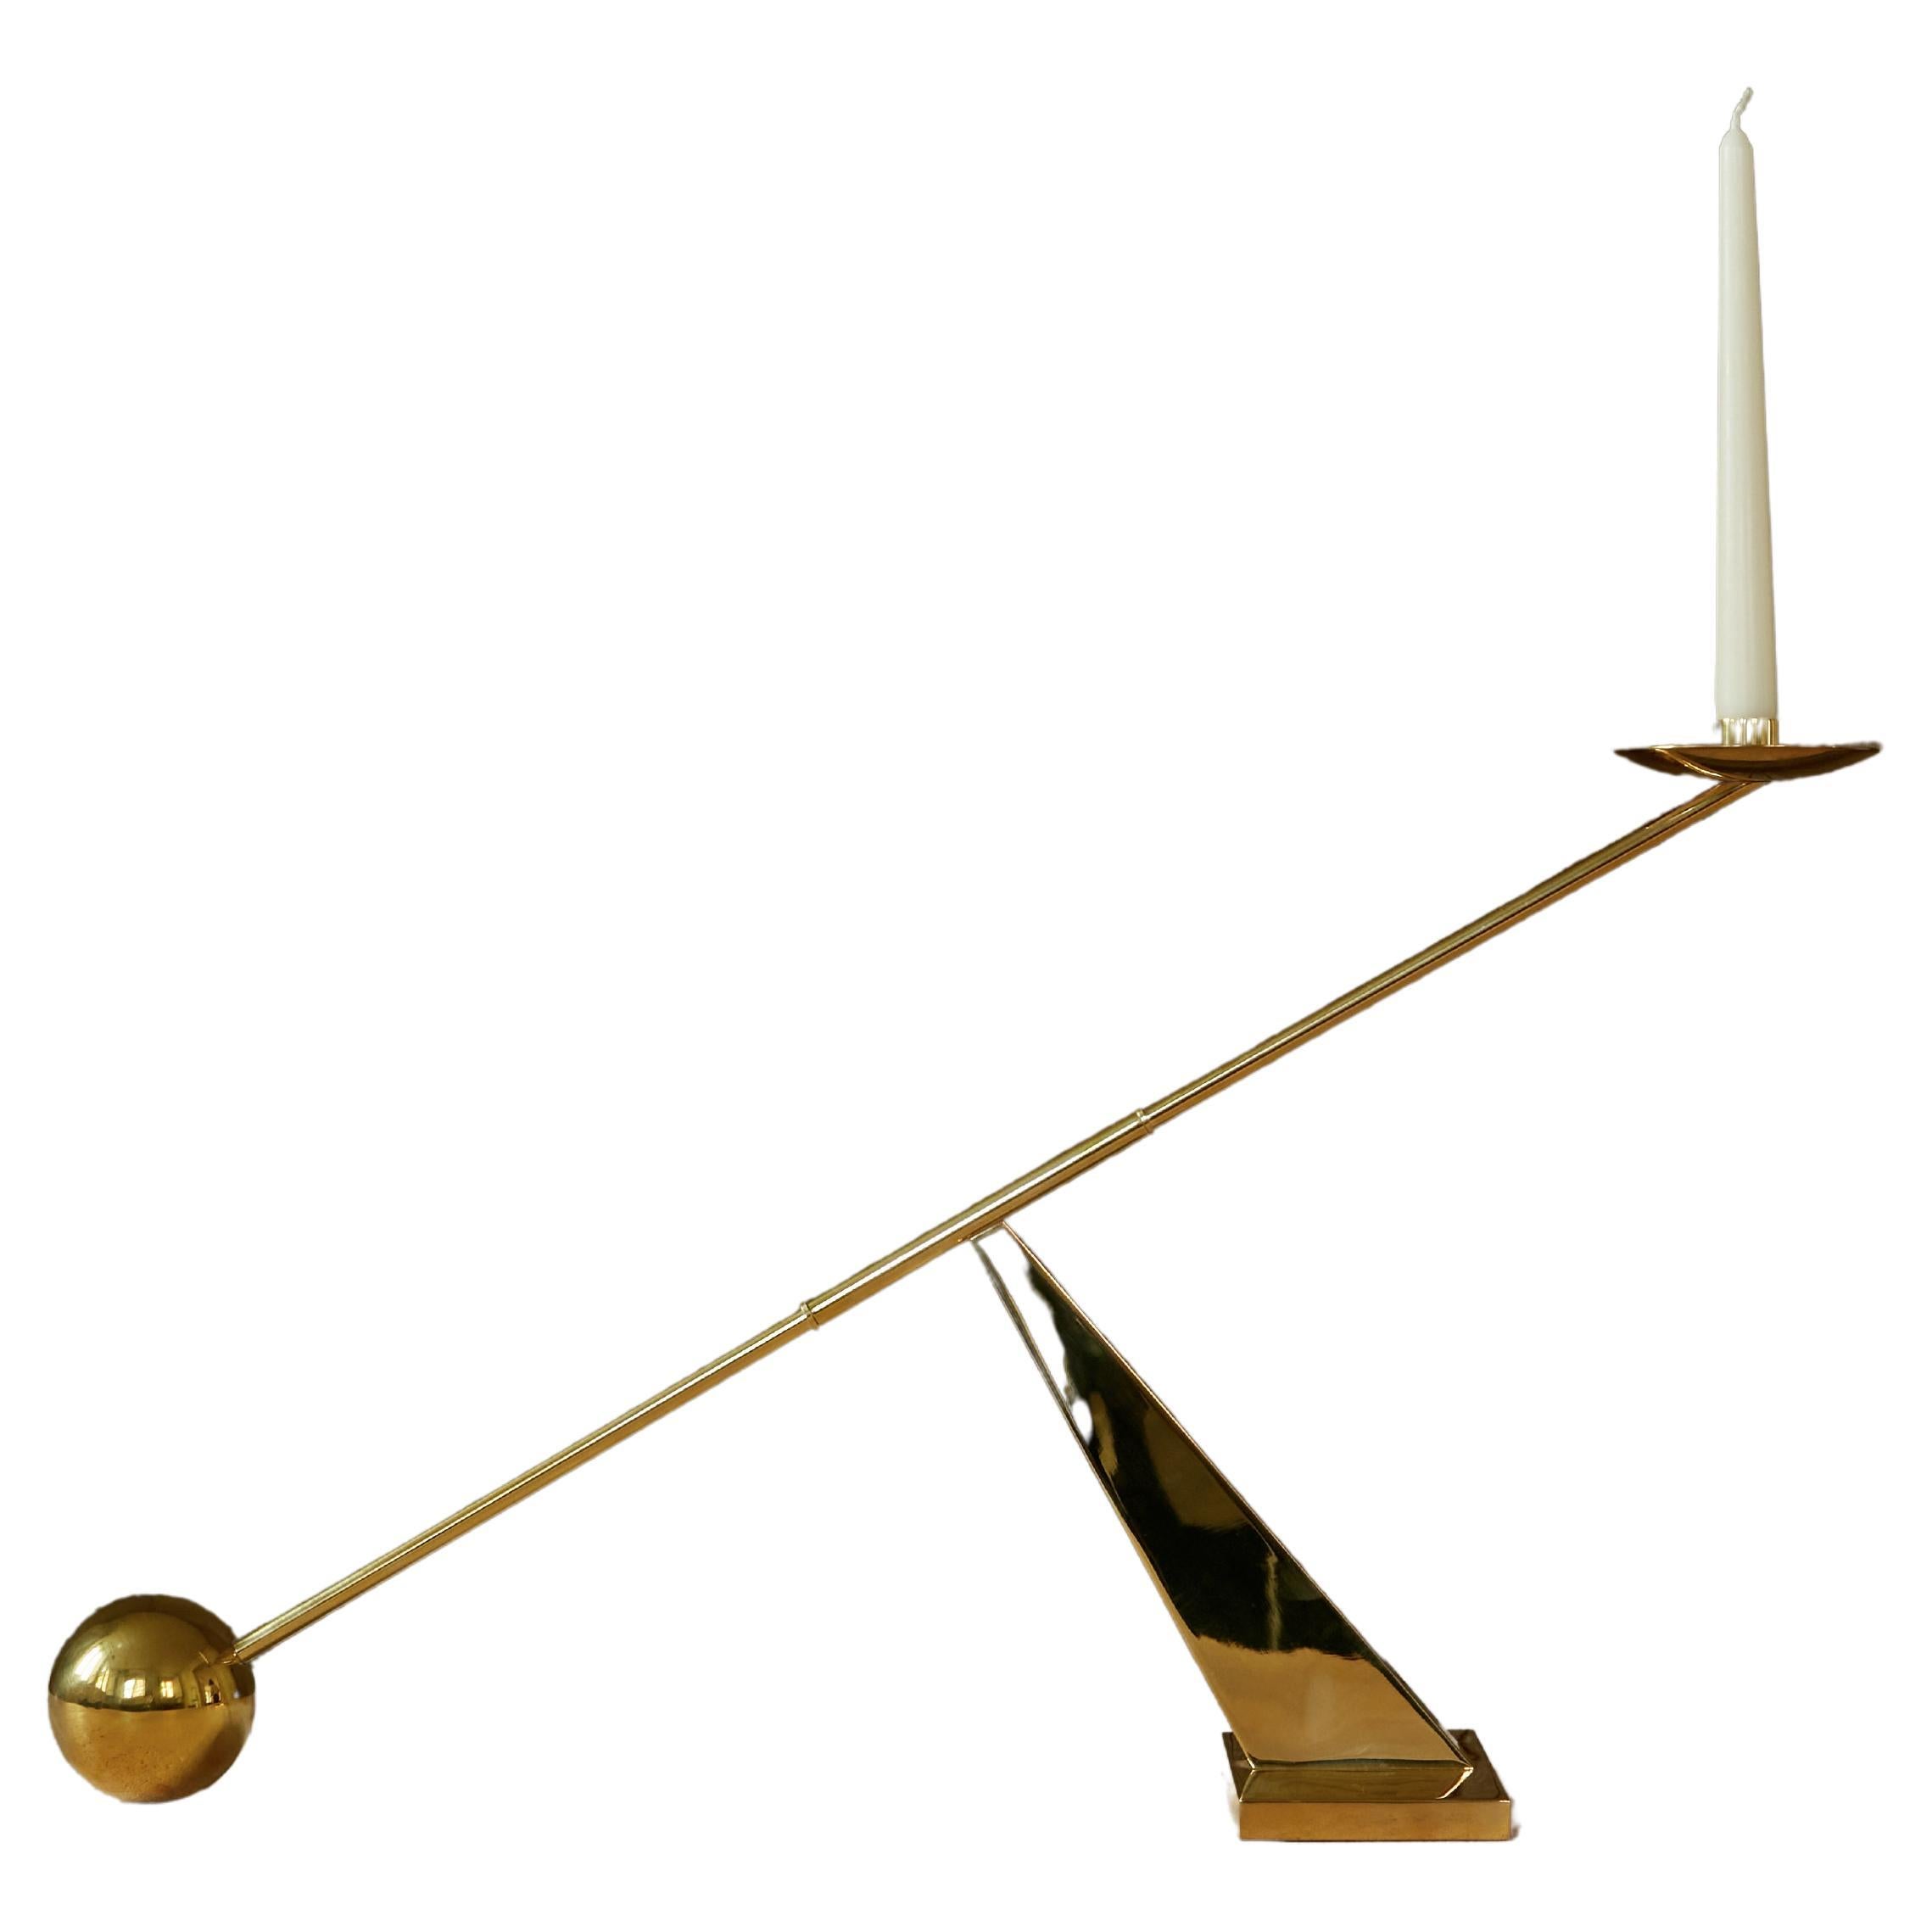 Sculptural brass table candle holder, contemporary